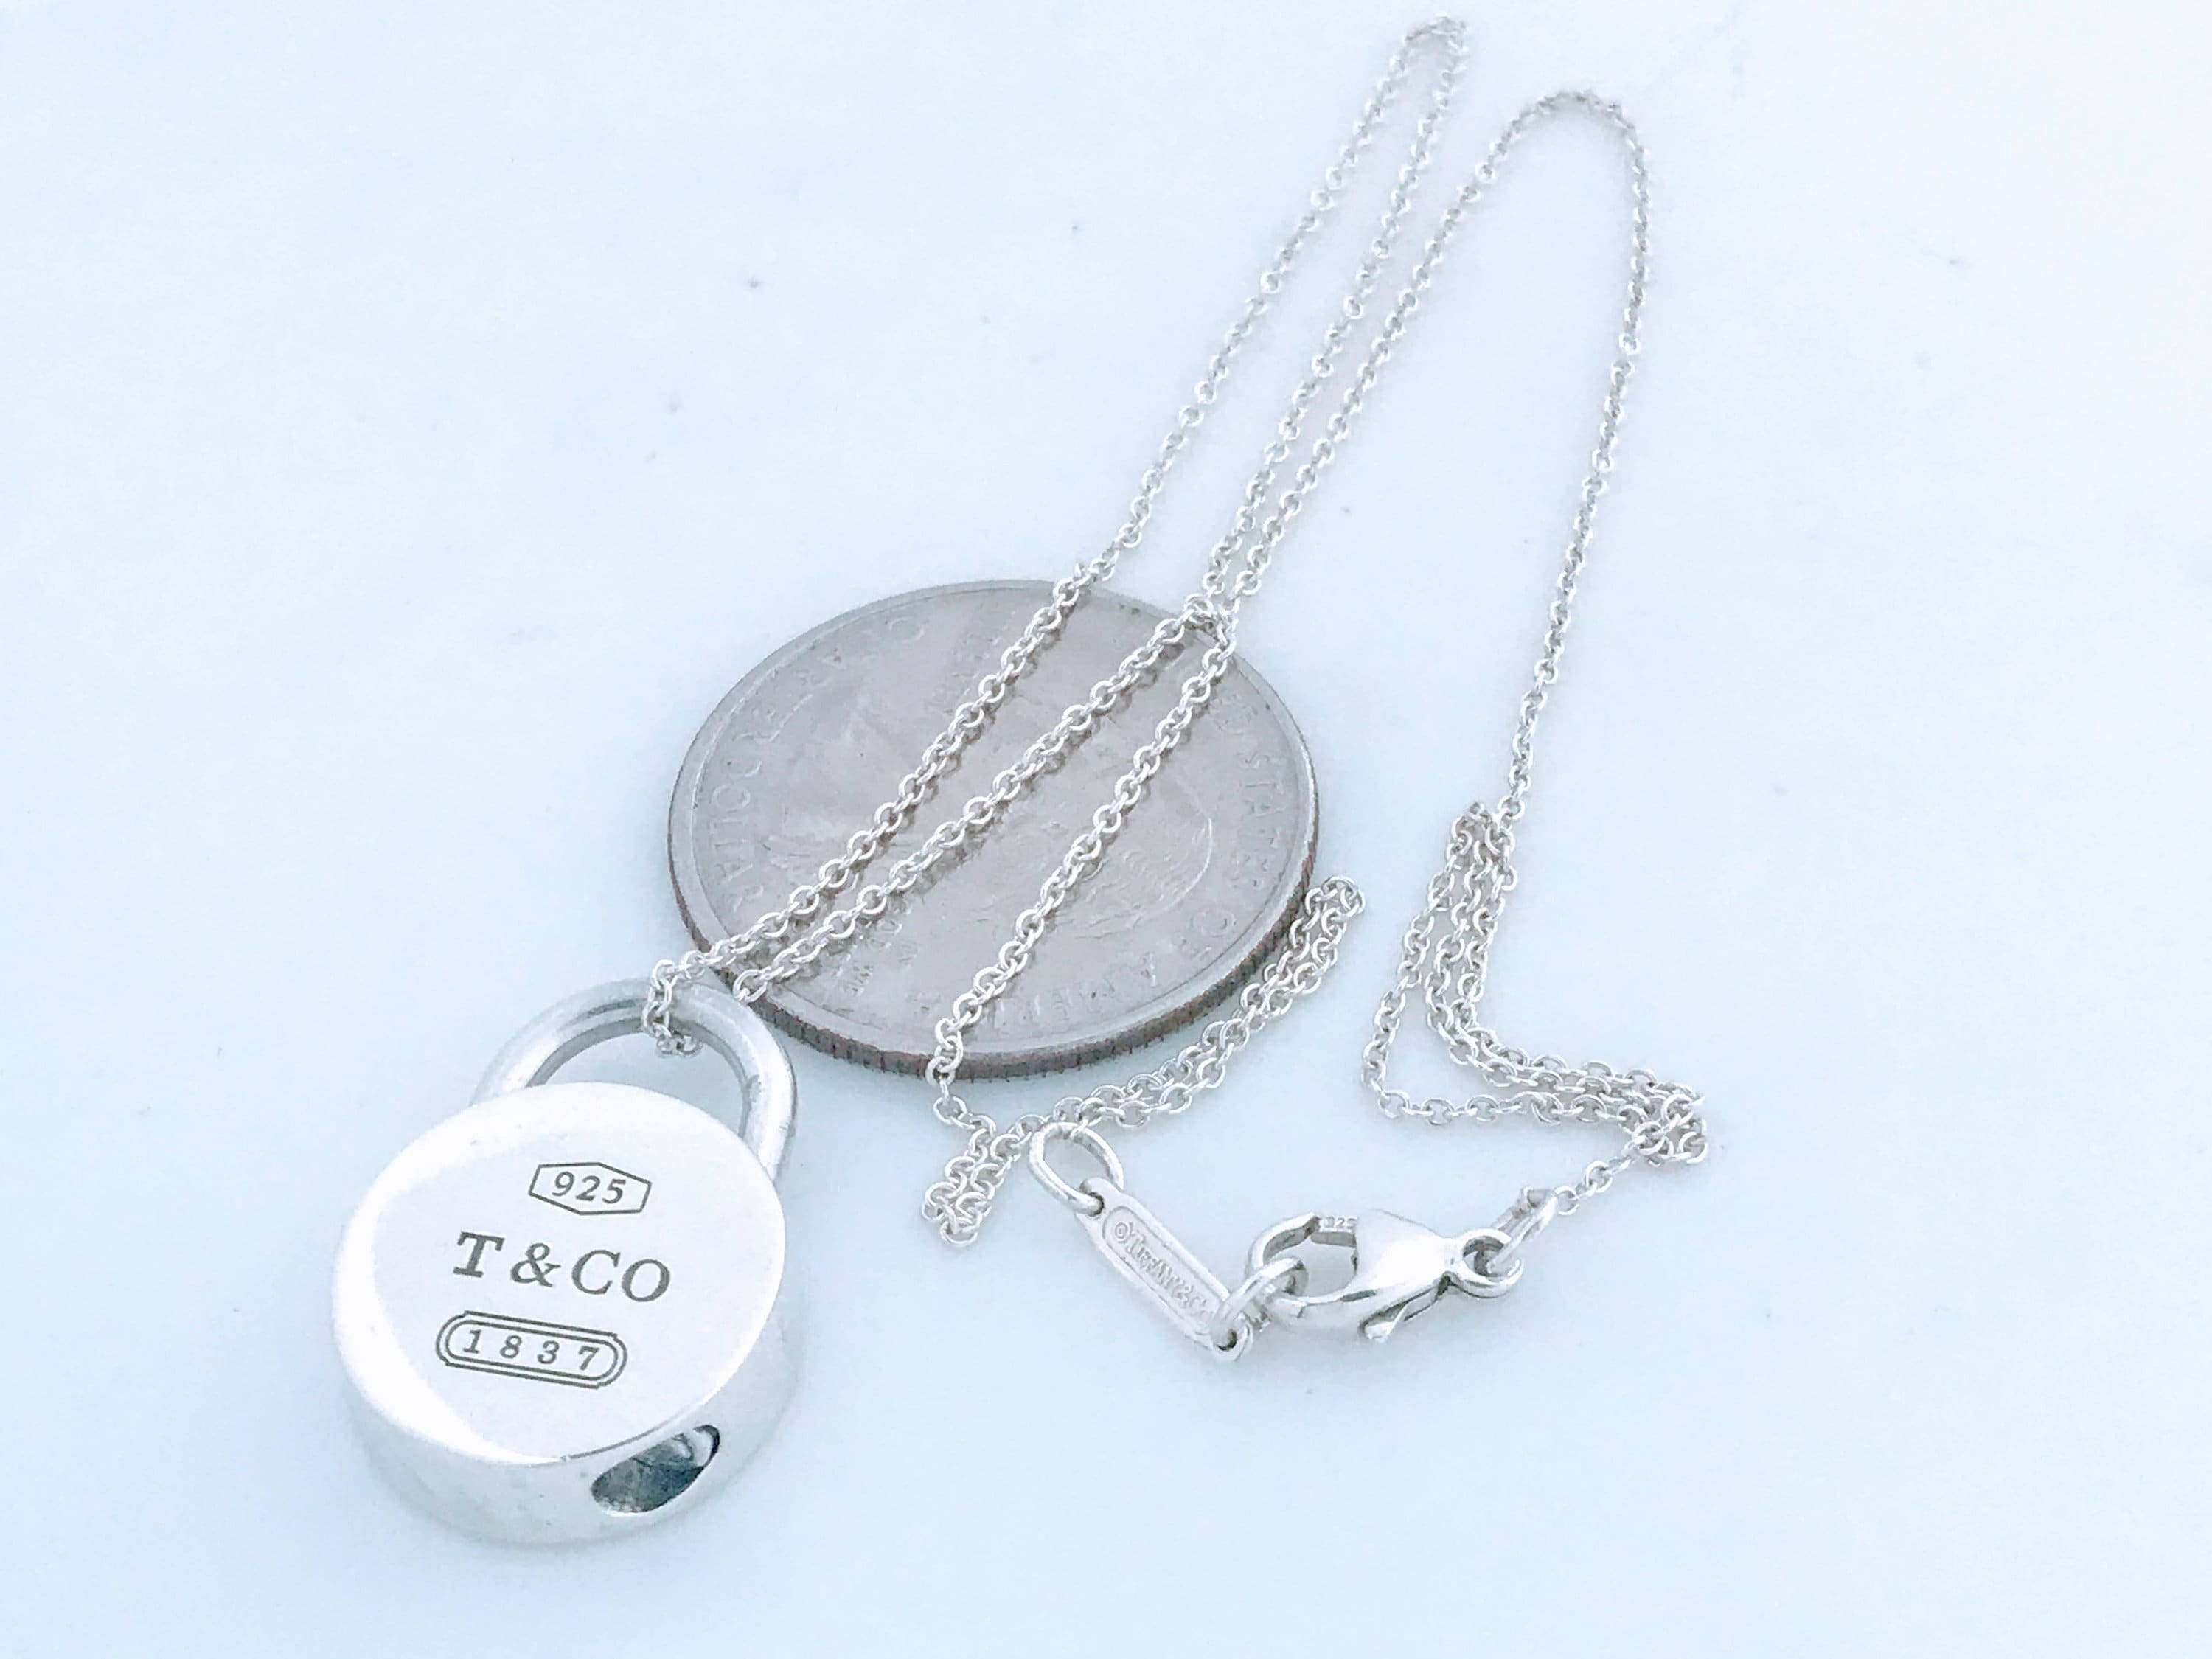 Tiffany & Co. Sterling Lock Necklace. 1837 Padlock Round Pendant and  Necklace - Necklaces, Facebook Marketplace